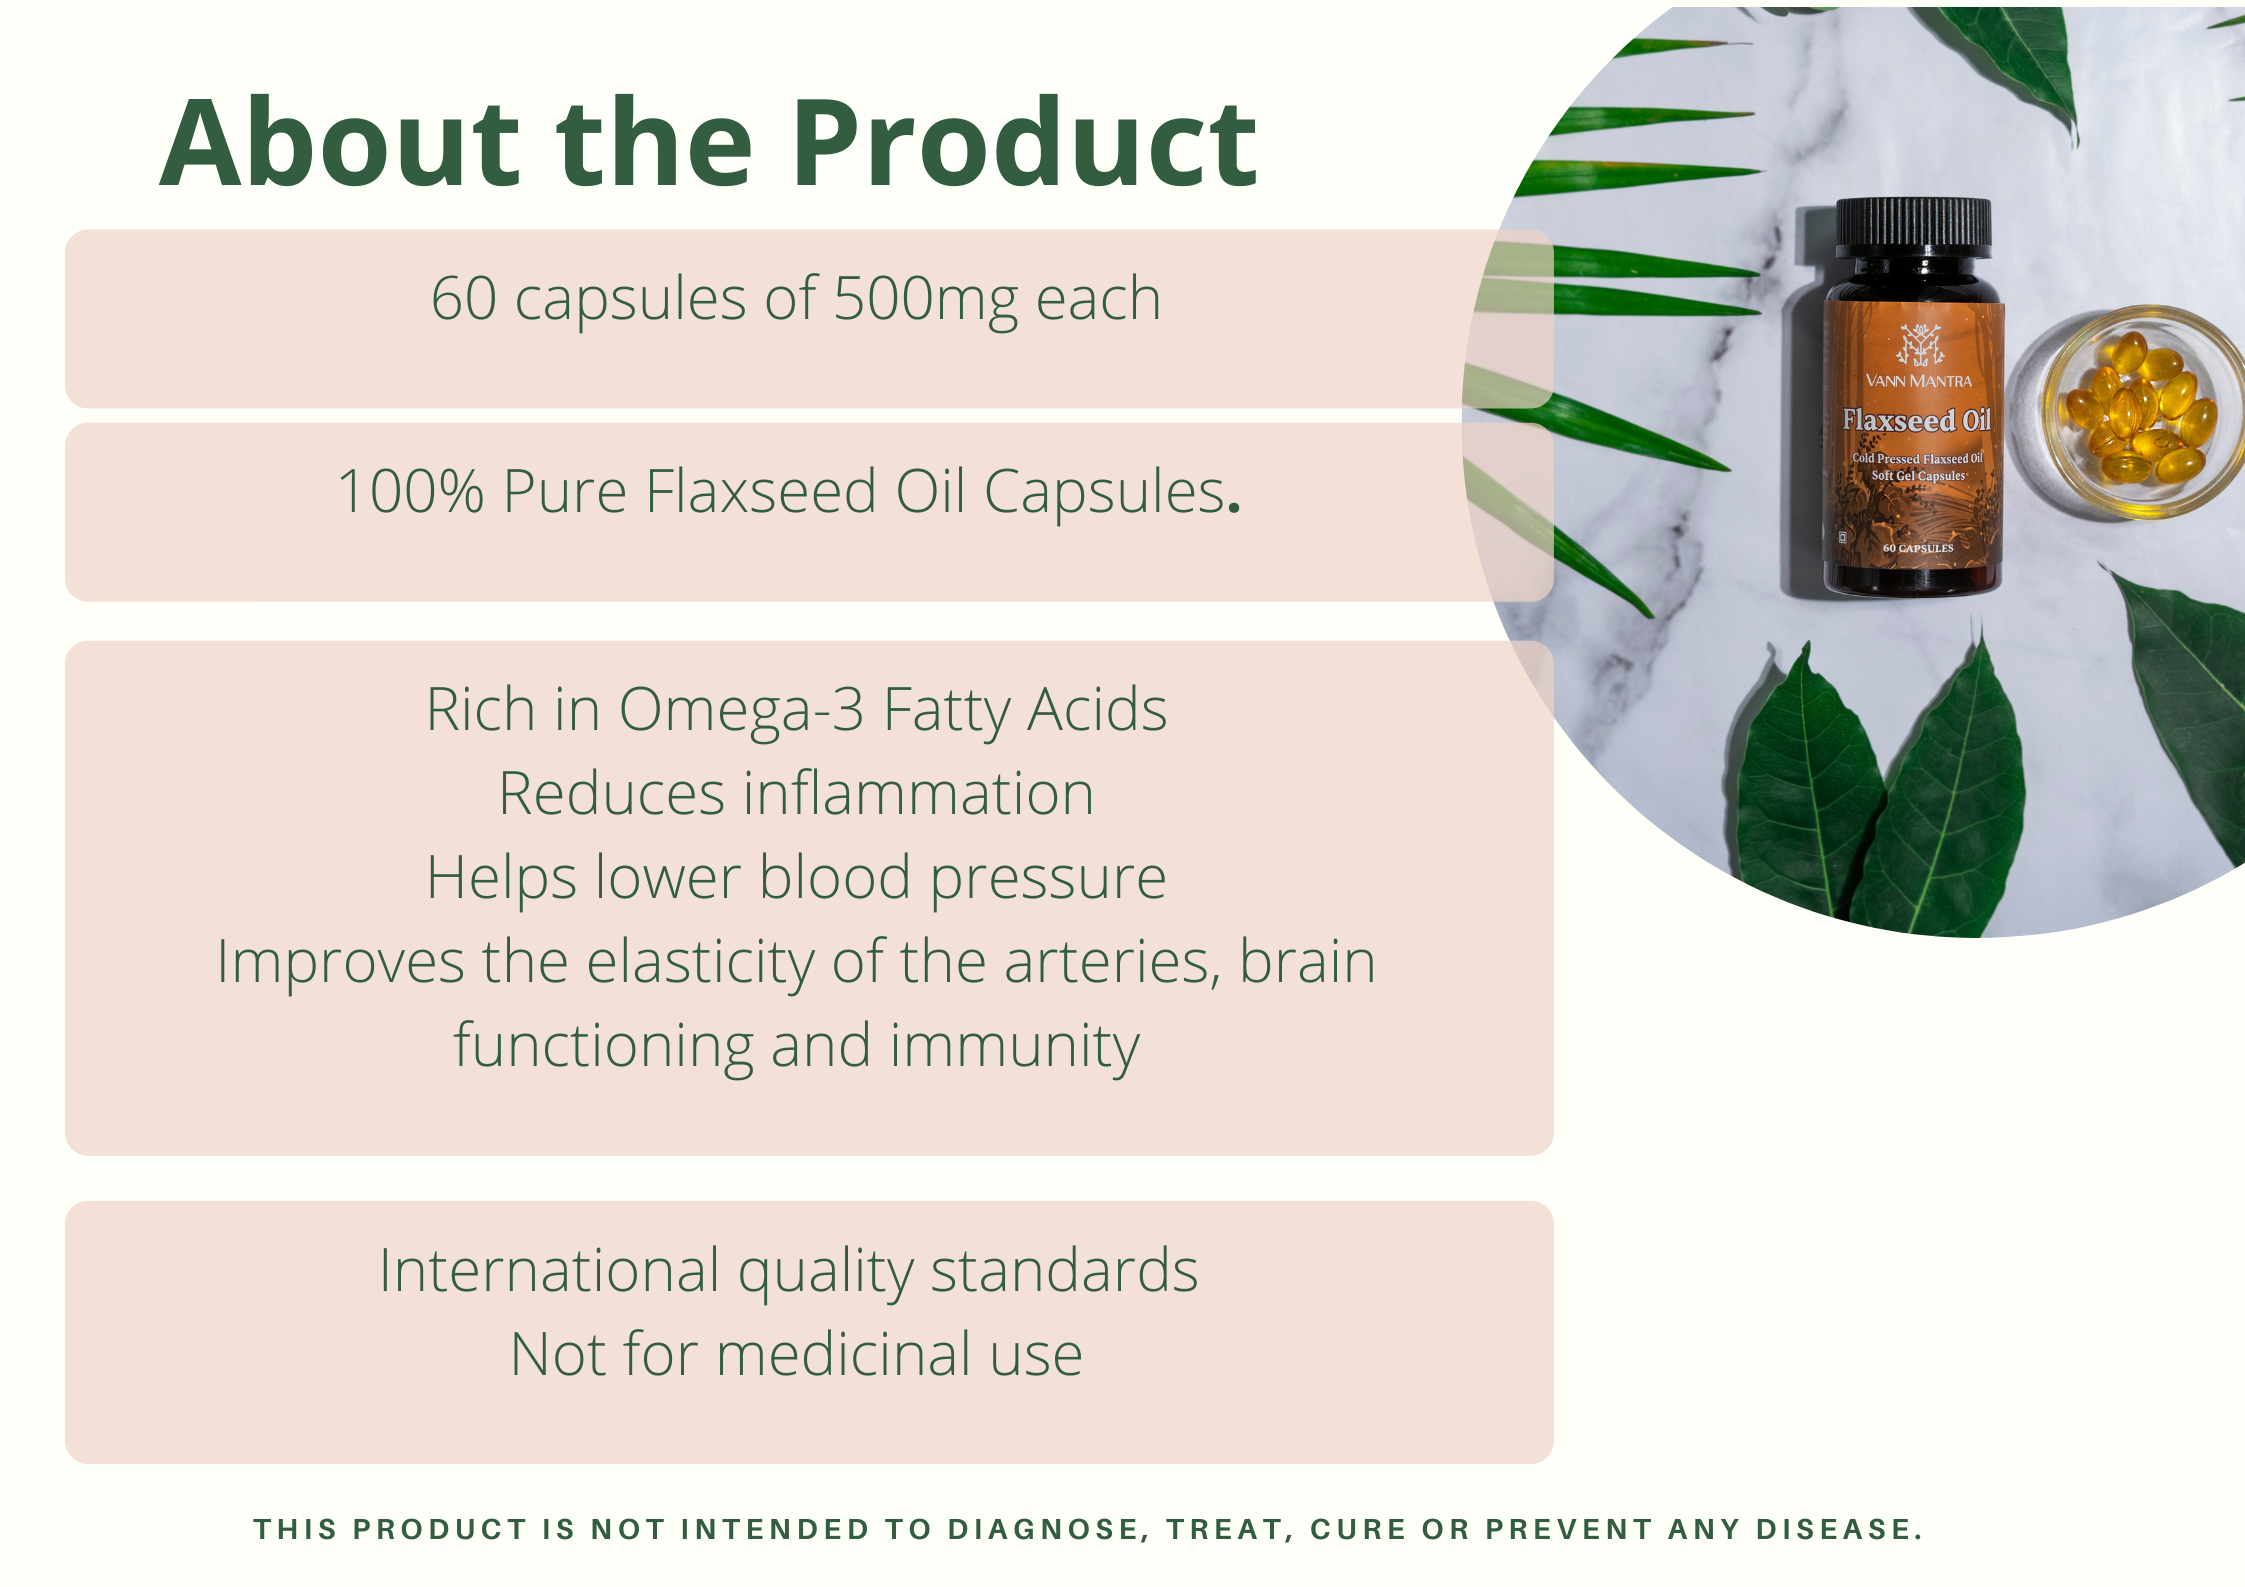 Infographic explaining the features and benefits of Flaxseed Oil Capsules.